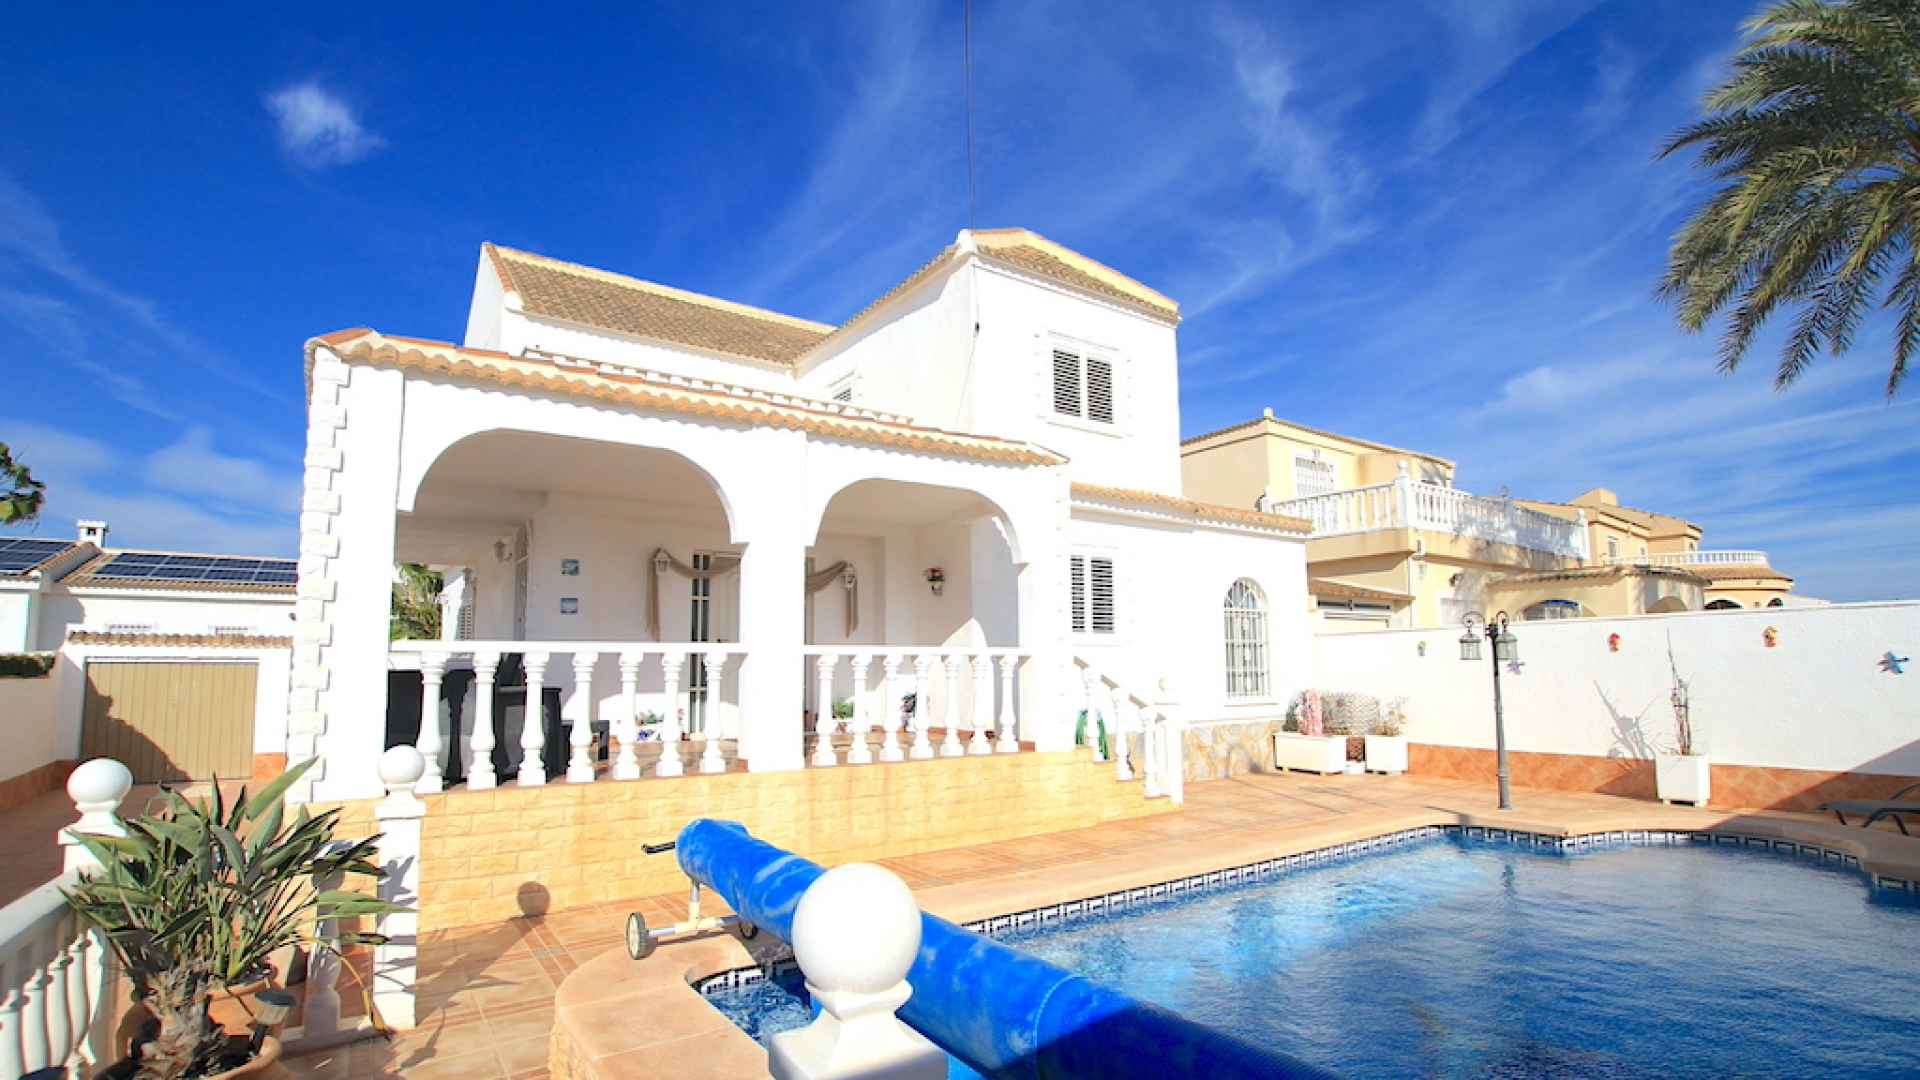 48358_expansive_4_bed_detached_villa_with_private_pool_and_garage_220224130514_img_7465